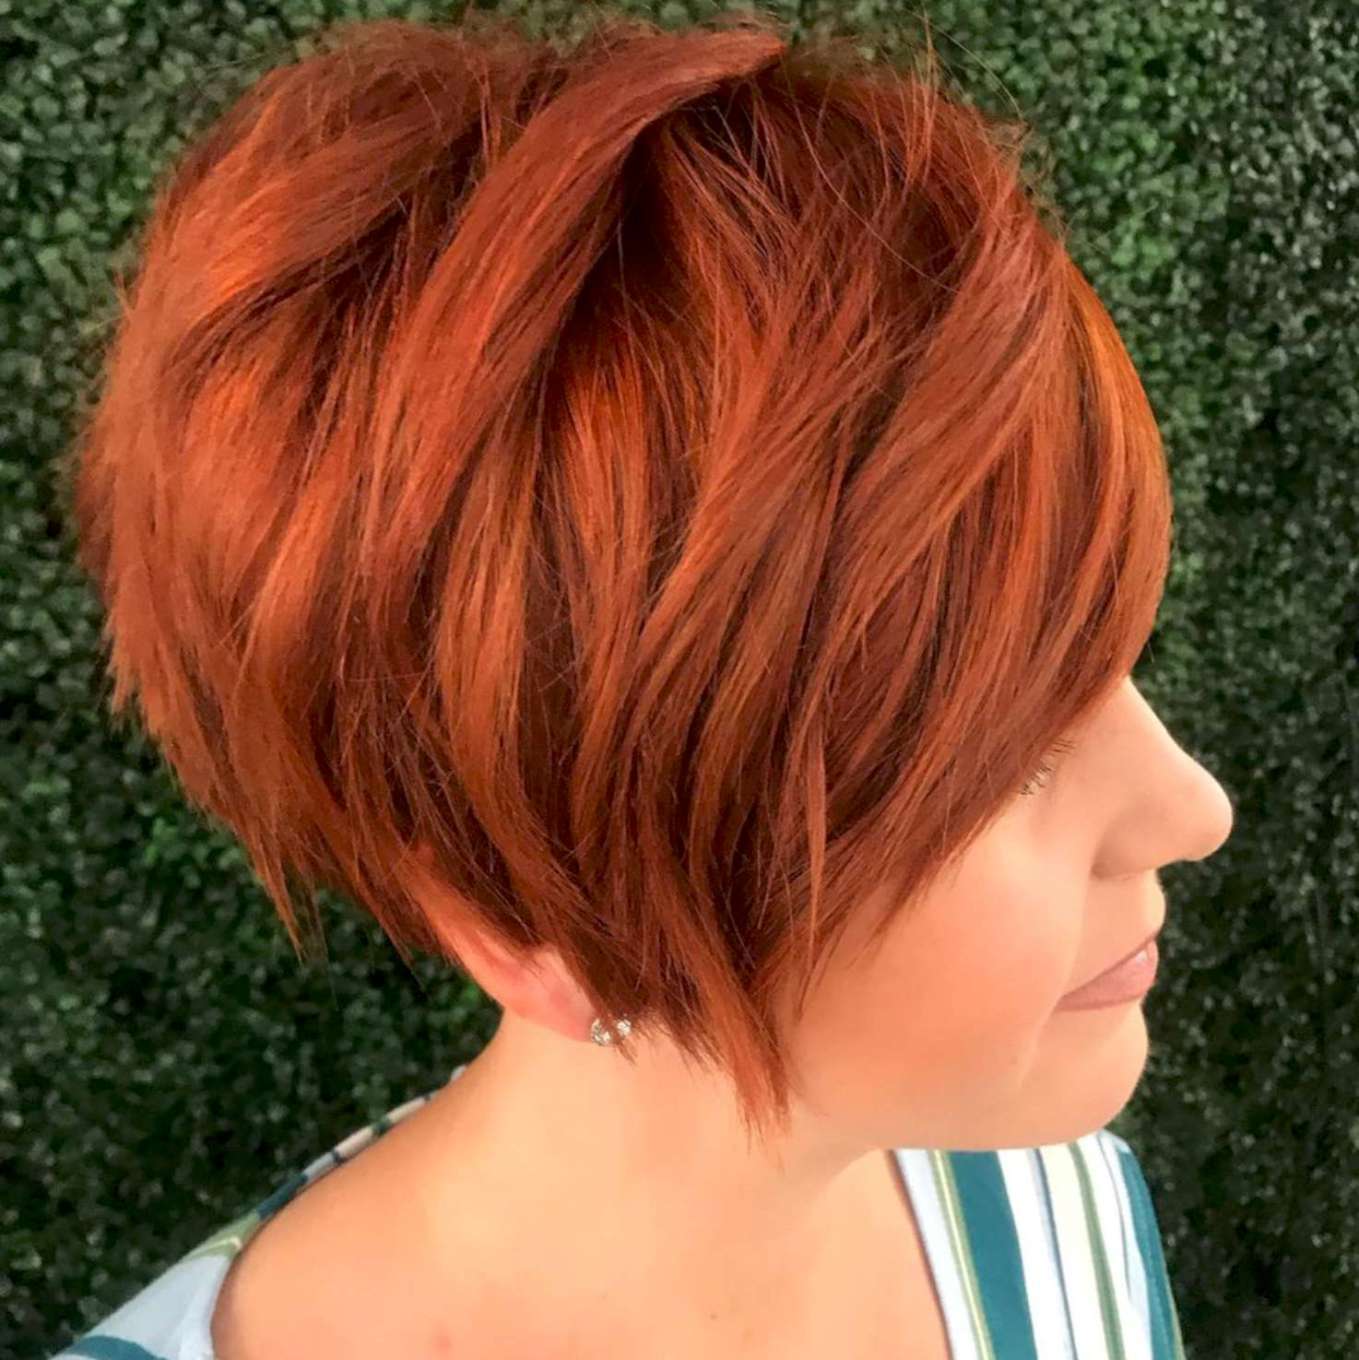 2020 Red Short Hairstyles - 1